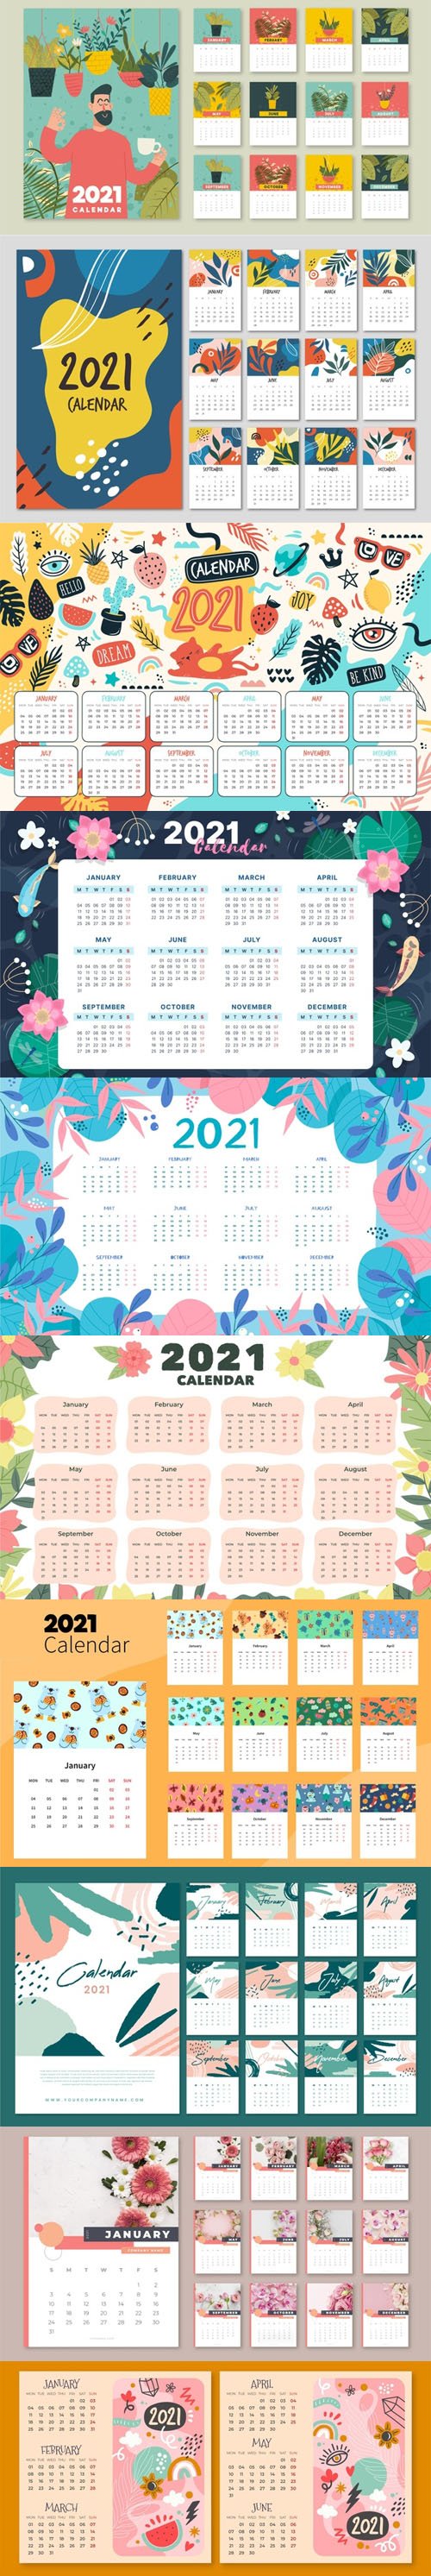 10 Hand-Drawn Illustrated 2021 Calendars Templates in Vector